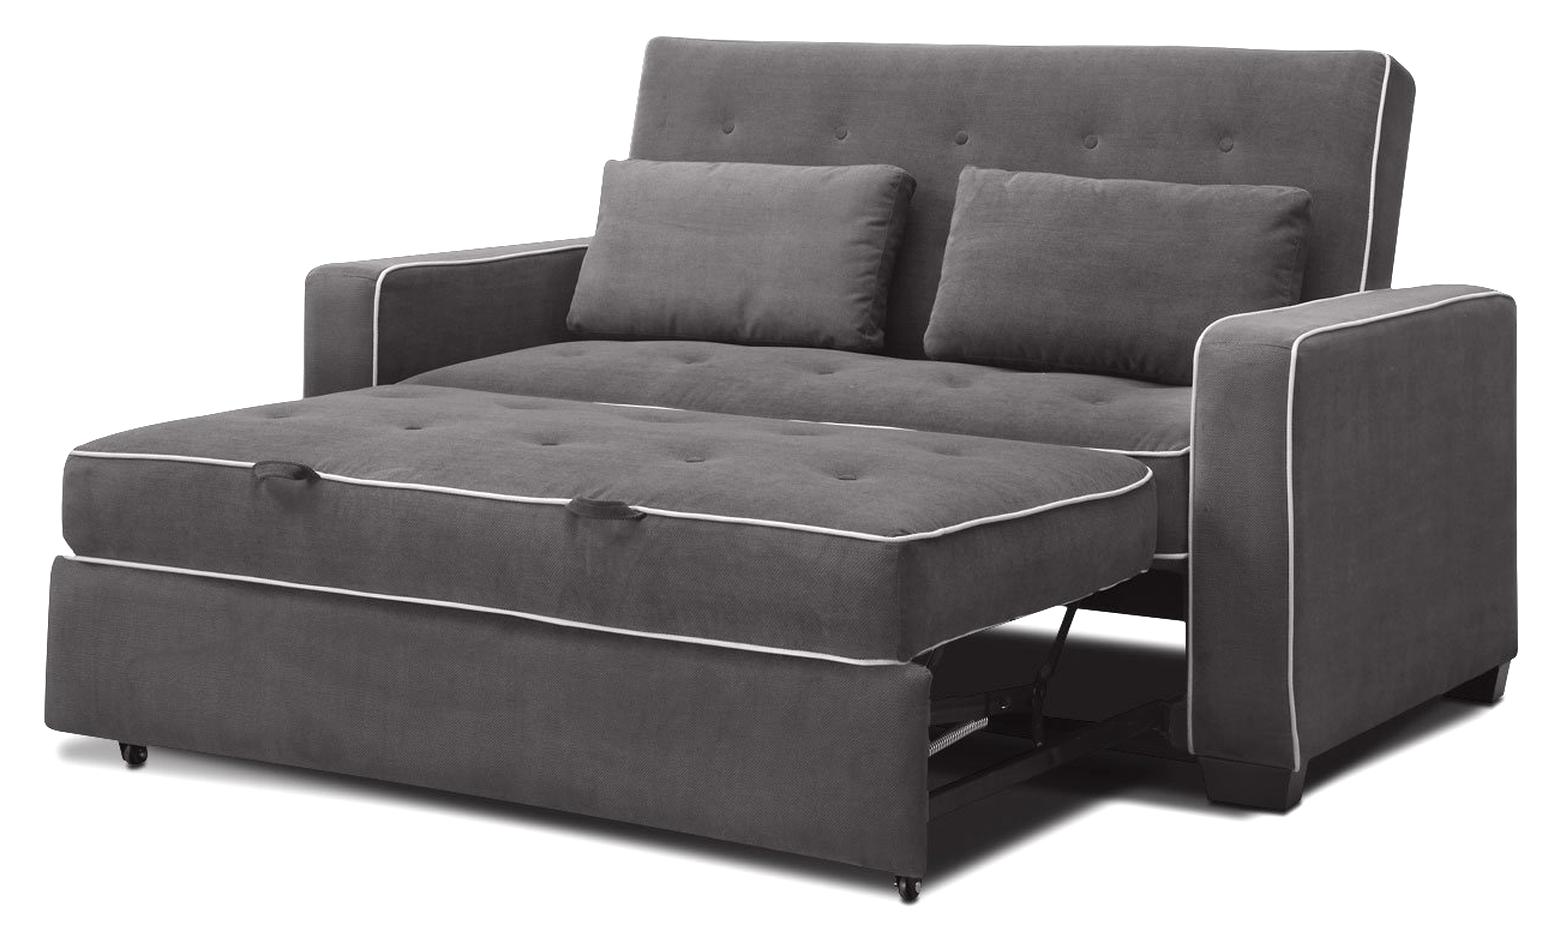 sofa bed for sale ebay